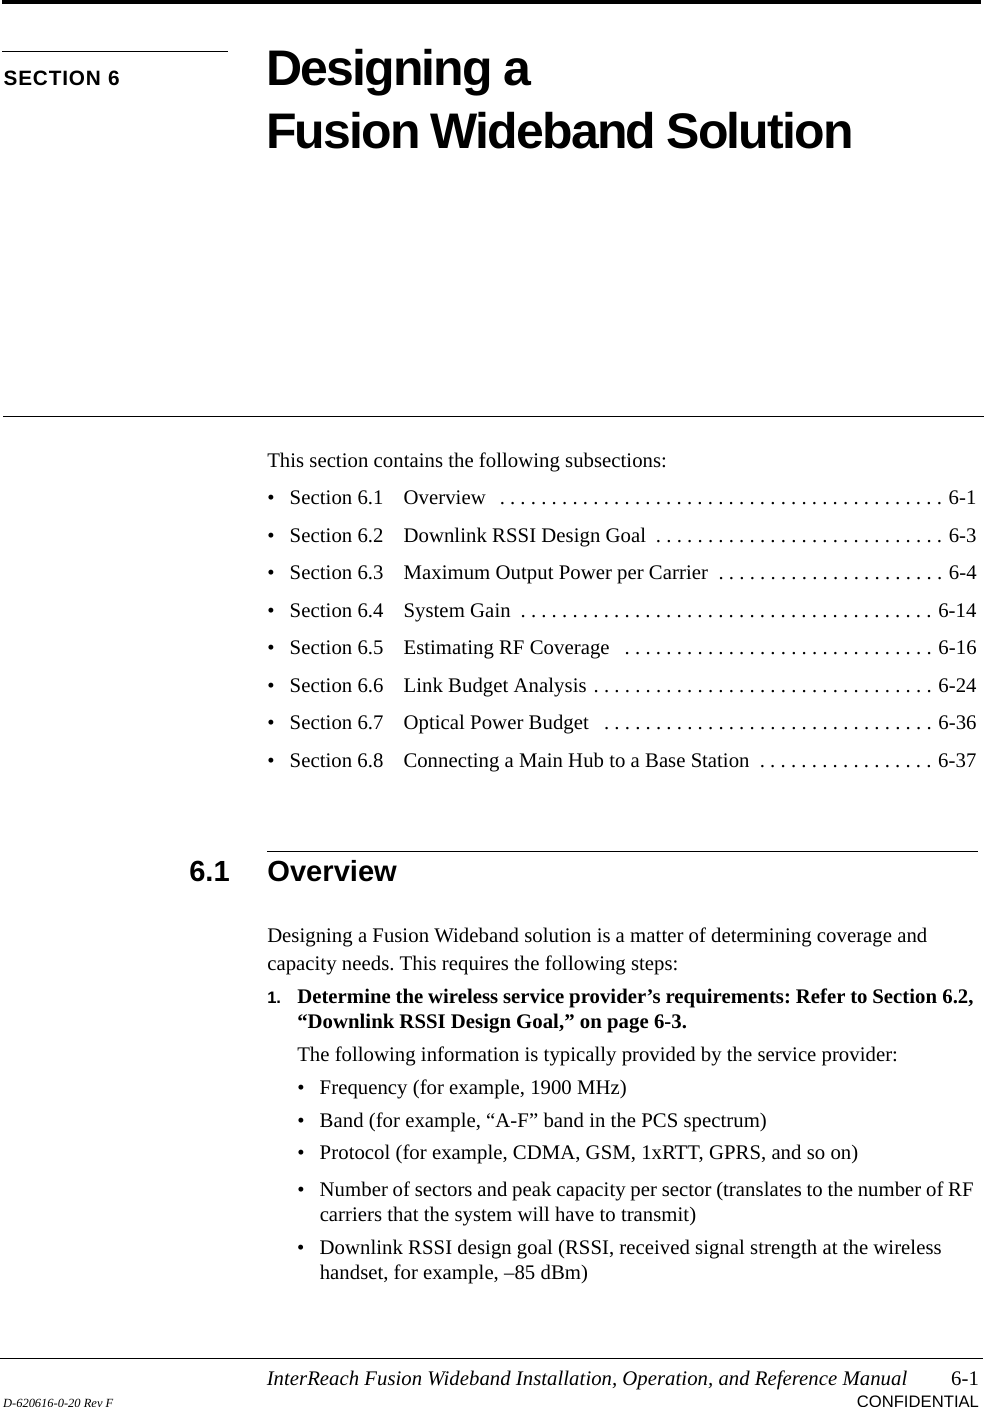 InterReach Fusion Wideband Installation, Operation, and Reference Manual 6-1D-620616-0-20 Rev F CONFIDENTIALSECTION 6 Designing a Fusion Wideband SolutionThis section contains the following subsections:• Section 6.1   Overview   . . . . . . . . . . . . . . . . . . . . . . . . . . . . . . . . . . . . . . . . . . . 6-1• Section 6.2   Downlink RSSI Design Goal  . . . . . . . . . . . . . . . . . . . . . . . . . . . . 6-3• Section 6.3   Maximum Output Power per Carrier  . . . . . . . . . . . . . . . . . . . . . . 6-4• Section 6.4   System Gain  . . . . . . . . . . . . . . . . . . . . . . . . . . . . . . . . . . . . . . . . 6-14• Section 6.5   Estimating RF Coverage   . . . . . . . . . . . . . . . . . . . . . . . . . . . . . . 6-16• Section 6.6   Link Budget Analysis . . . . . . . . . . . . . . . . . . . . . . . . . . . . . . . . . 6-24• Section 6.7   Optical Power Budget   . . . . . . . . . . . . . . . . . . . . . . . . . . . . . . . . 6-36• Section 6.8   Connecting a Main Hub to a Base Station  . . . . . . . . . . . . . . . . . 6-376.1 OverviewDesigning a Fusion Wideband solution is a matter of determining coverage and capacity needs. This requires the following steps:1. Determine the wireless service provider’s requirements: Refer to Section 6.2, “Downlink RSSI Design Goal,” on page 6-3.The following information is typically provided by the service provider:• Frequency (for example, 1900 MHz)• Band (for example, “A-F” band in the PCS spectrum)• Protocol (for example, CDMA, GSM, 1xRTT, GPRS, and so on)• Number of sectors and peak capacity per sector (translates to the number of RF carriers that the system will have to transmit)• Downlink RSSI design goal (RSSI, received signal strength at the wireless handset, for example, –85 dBm)